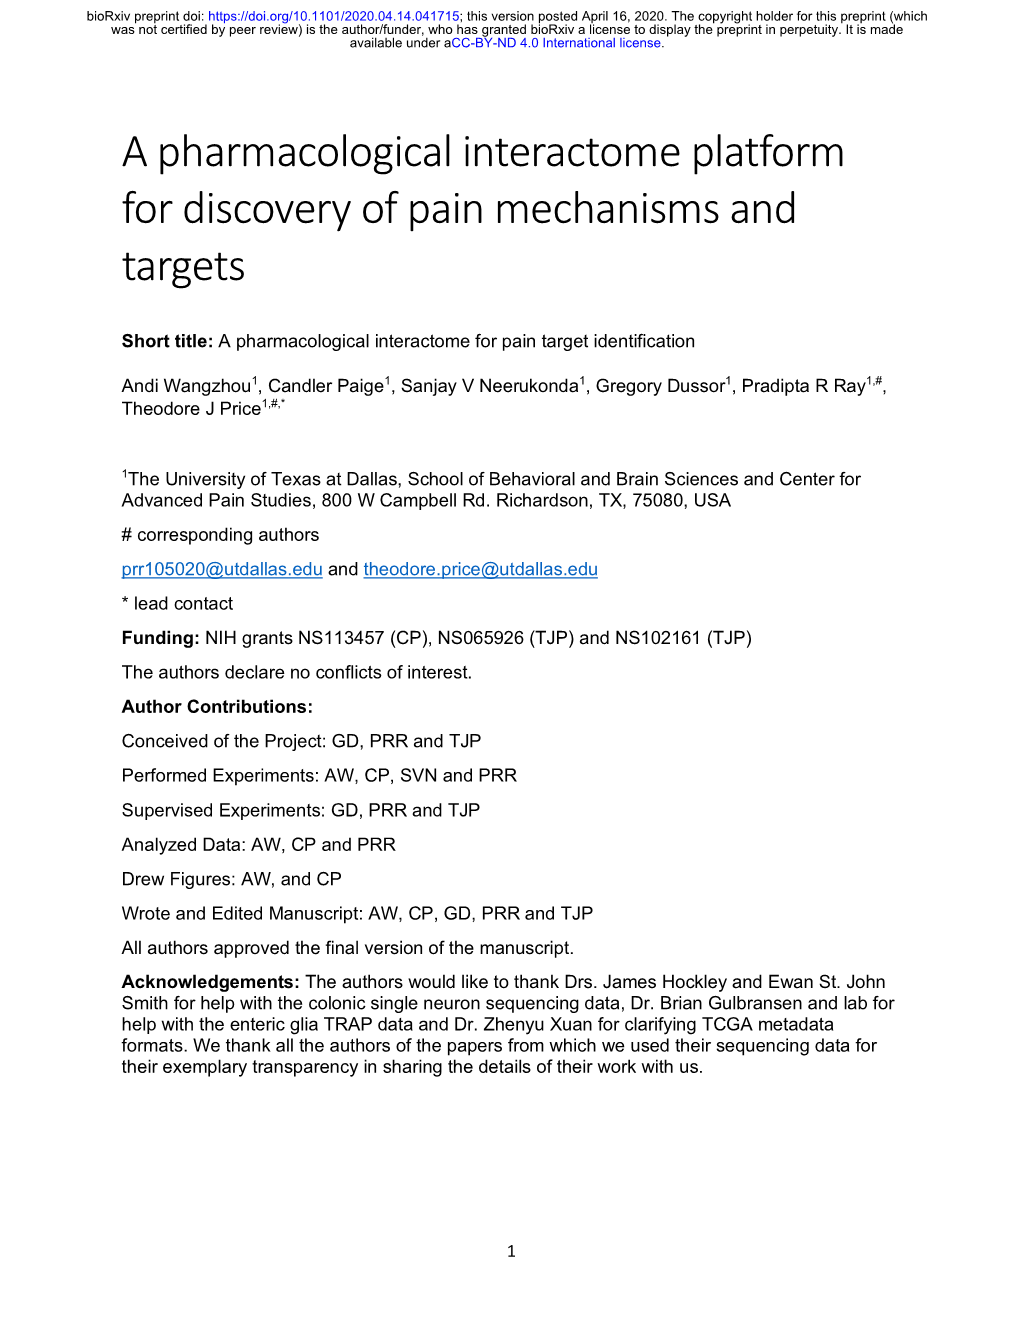 A Pharmacological Interactome Platform for Discovery of Pain Mechanisms and Targets